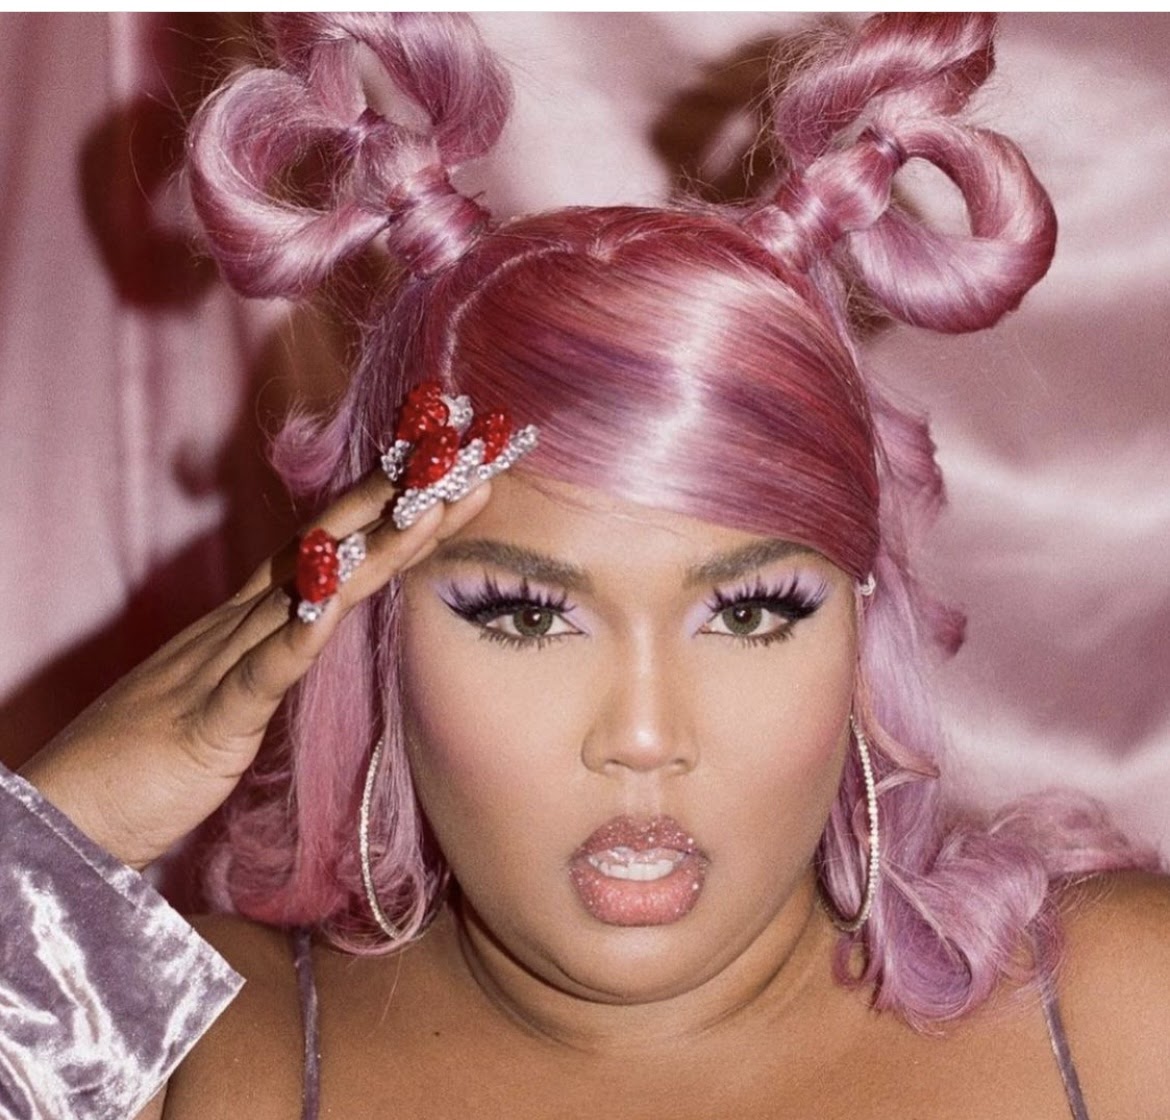 Lizzo Issues Apology for Offensive “GRRRLS” Lyric and Drops New Version